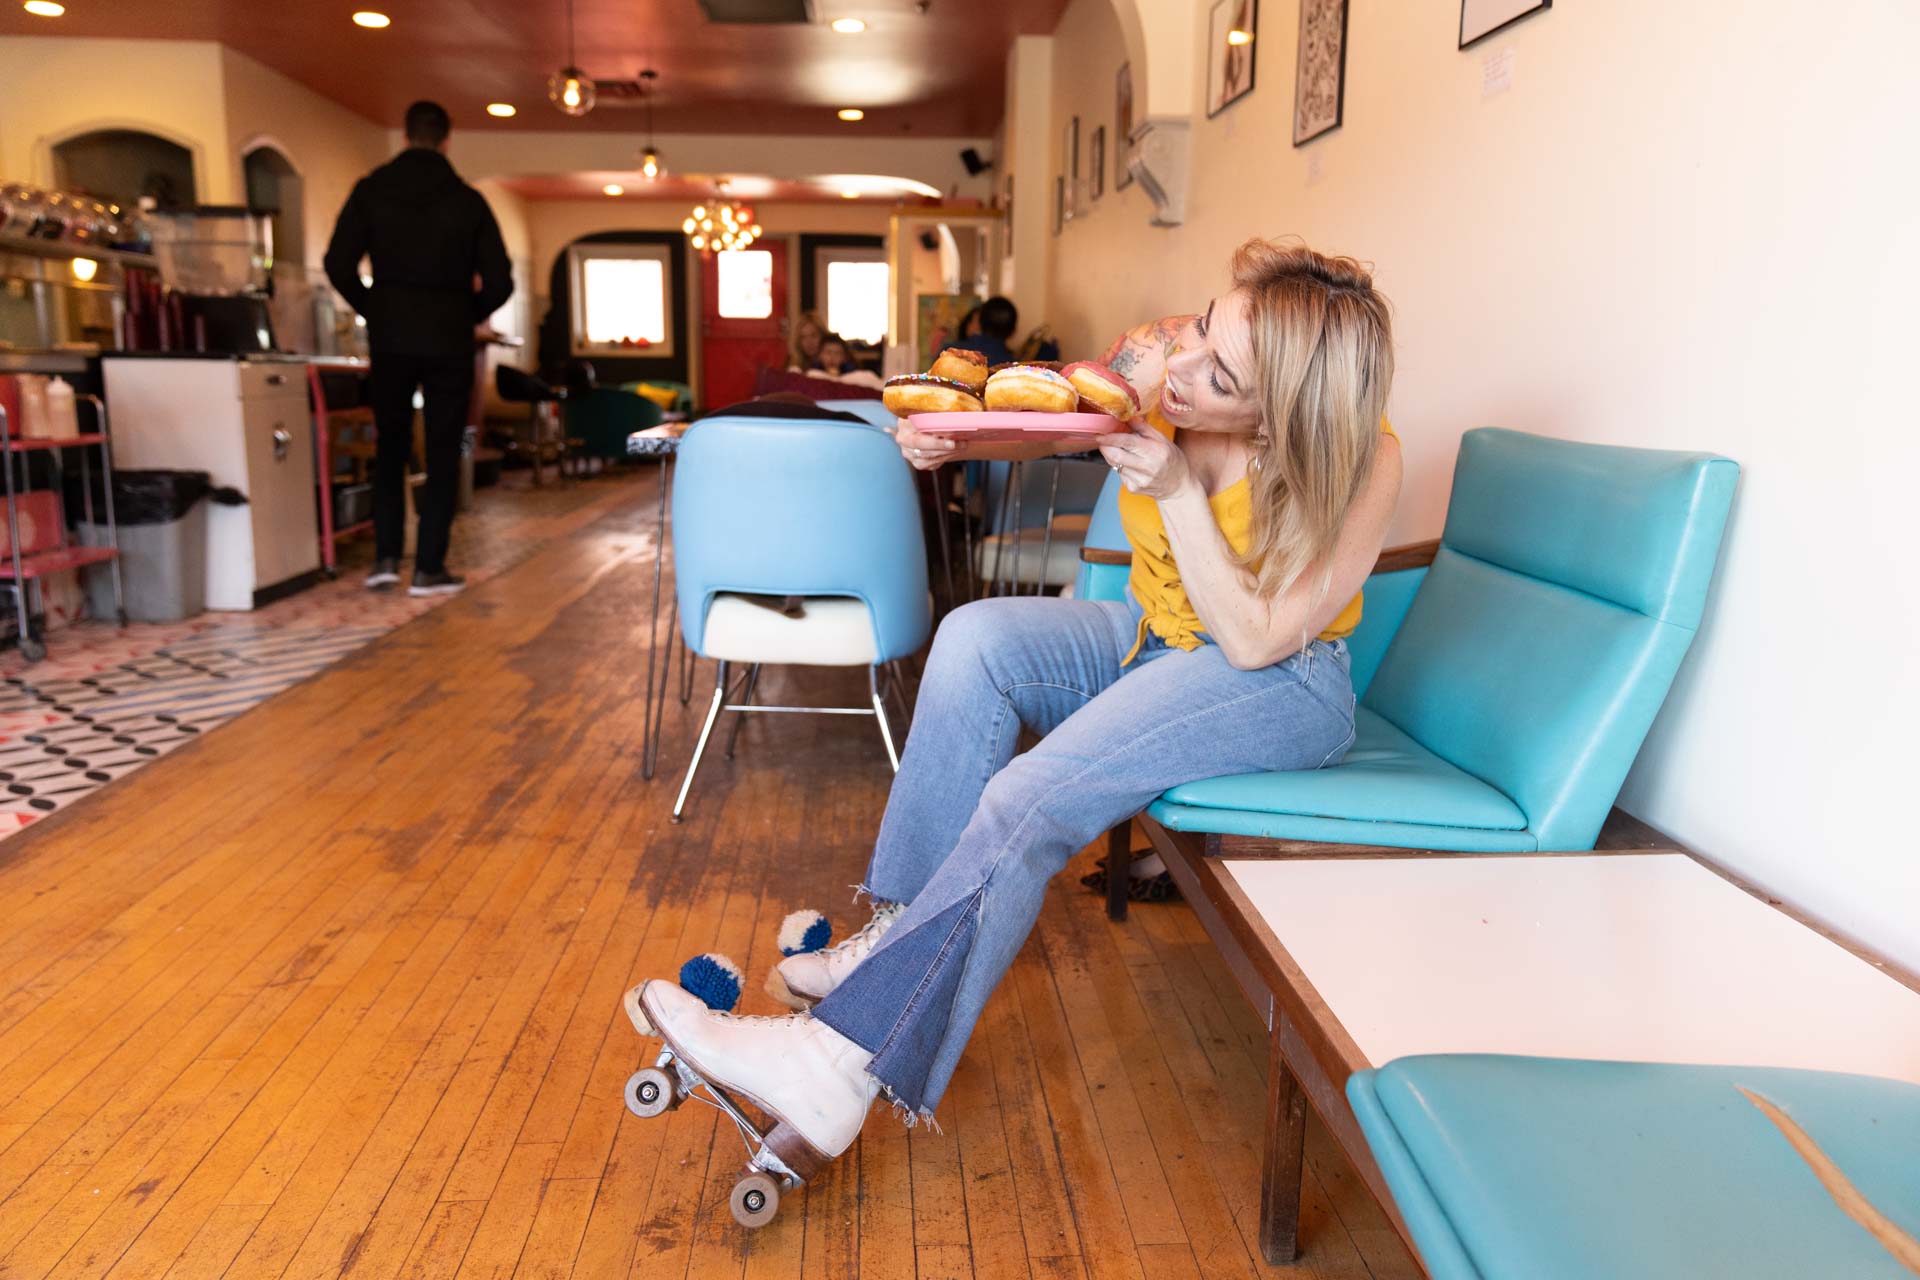 Jessica Strobel about to eat a donut in a retro cafe